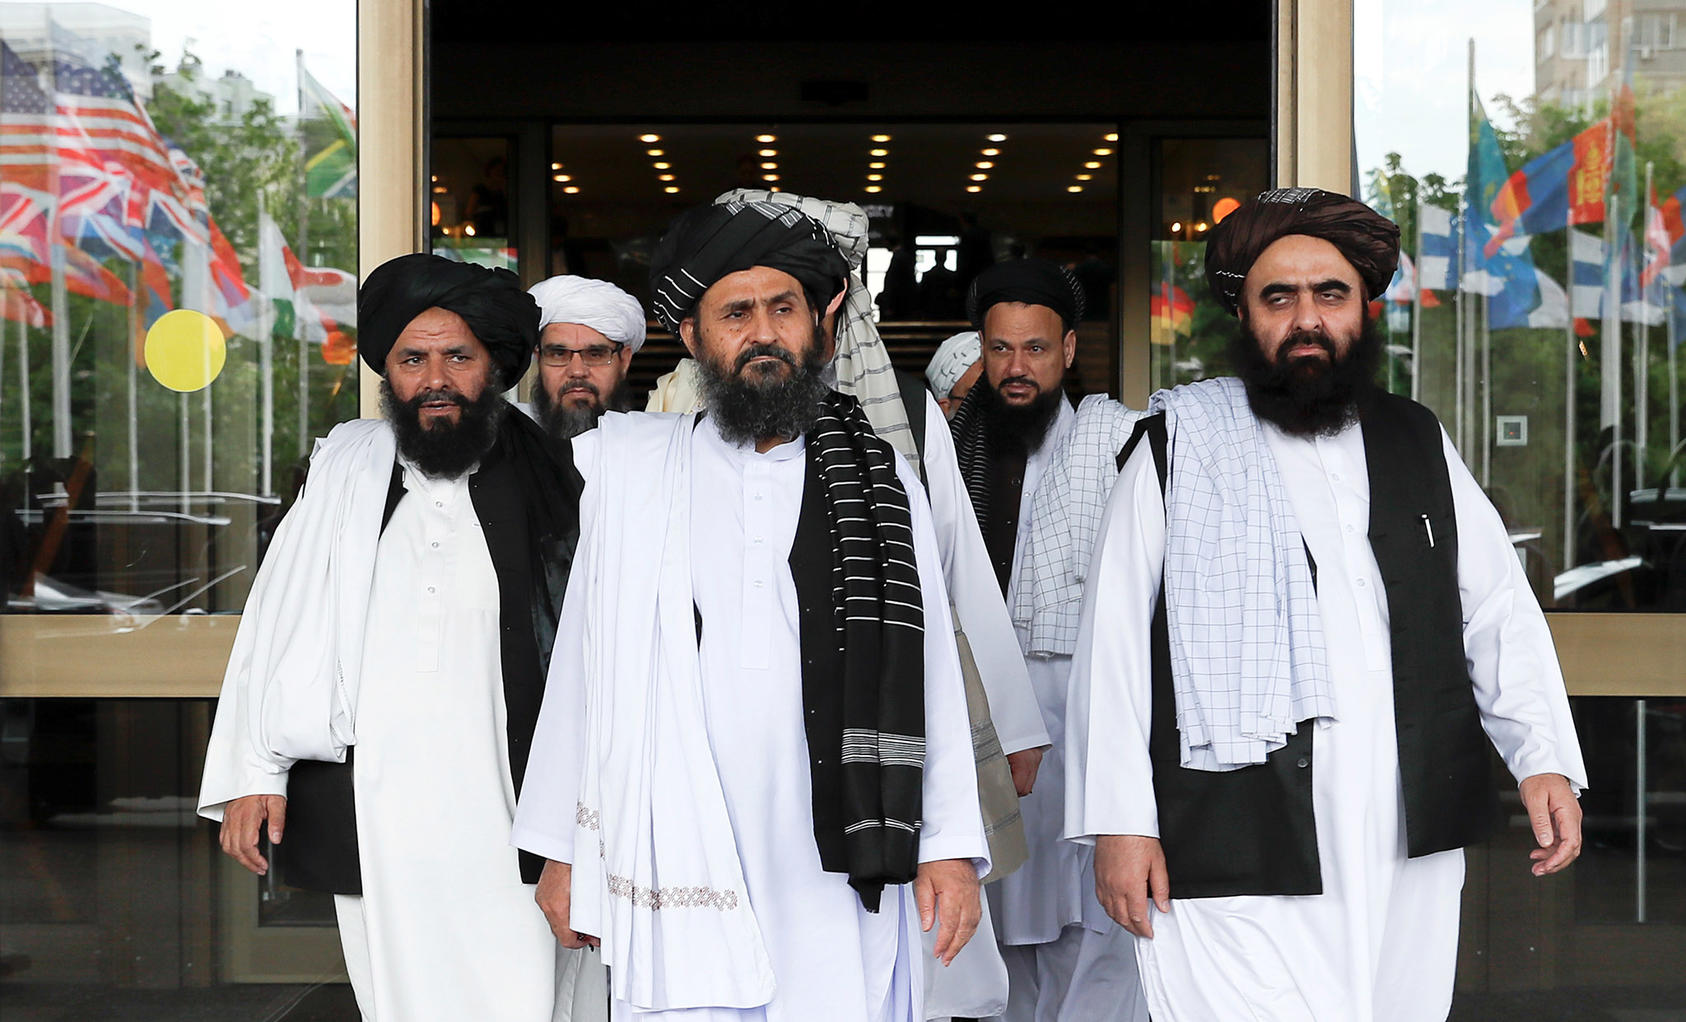 Members of a Taliban delegation, led by chief negotiator Mullah Abdul Ghani Baradar, after peace talks with senior Afghan politicians in Moscow on May 30, 2019. (Evgenia Novozhenina/Reuters)